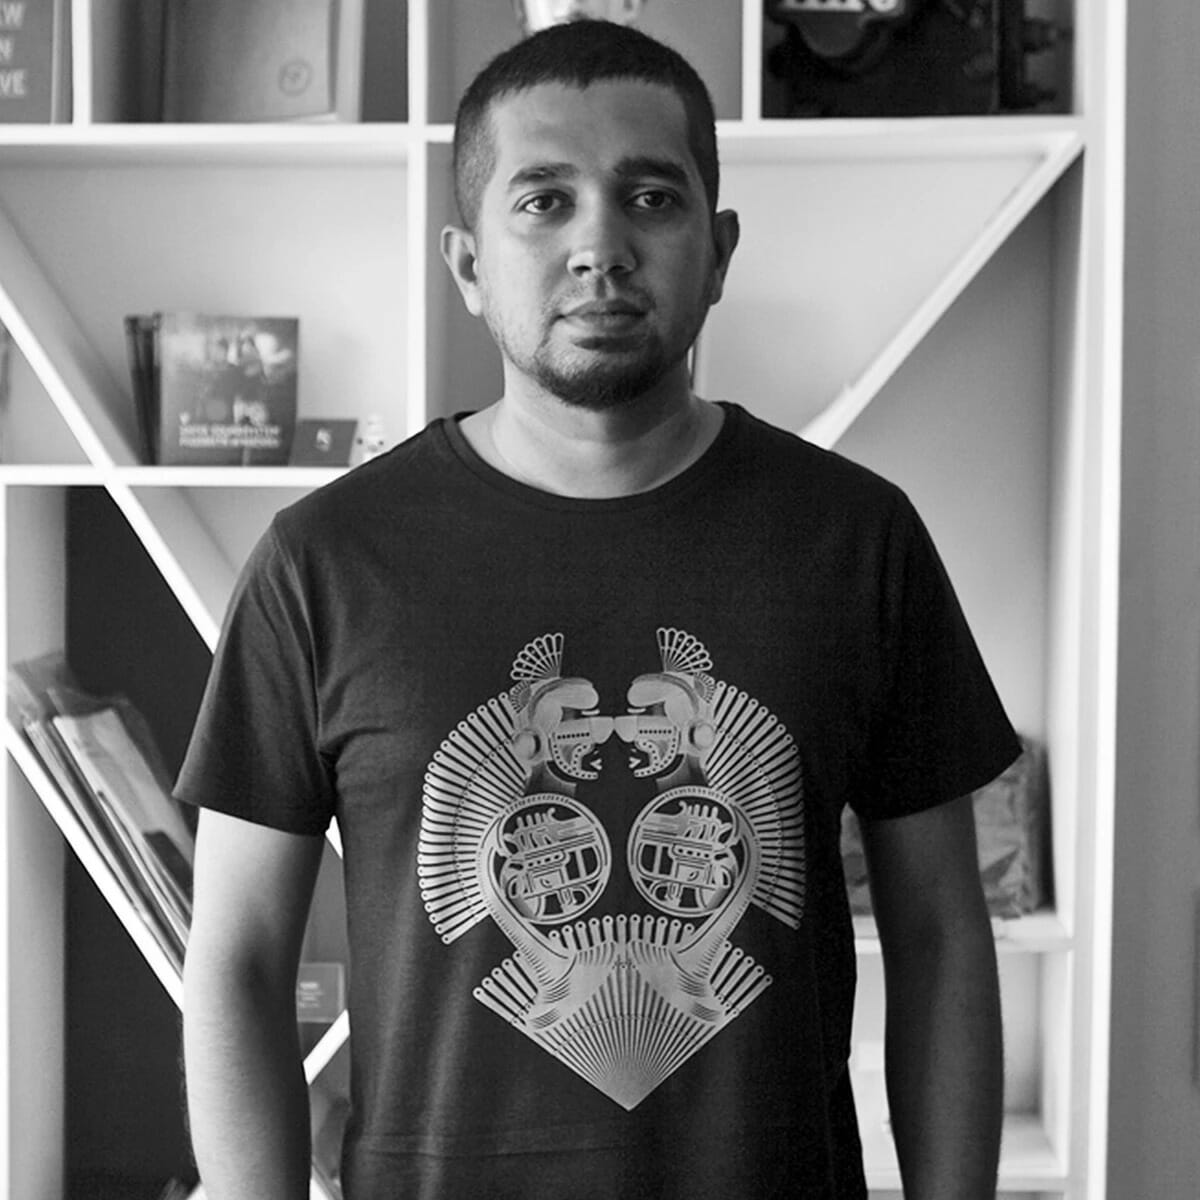 Black and white photo of Reshidev standing in front of a book shelf wearing a graphic t-shirt.